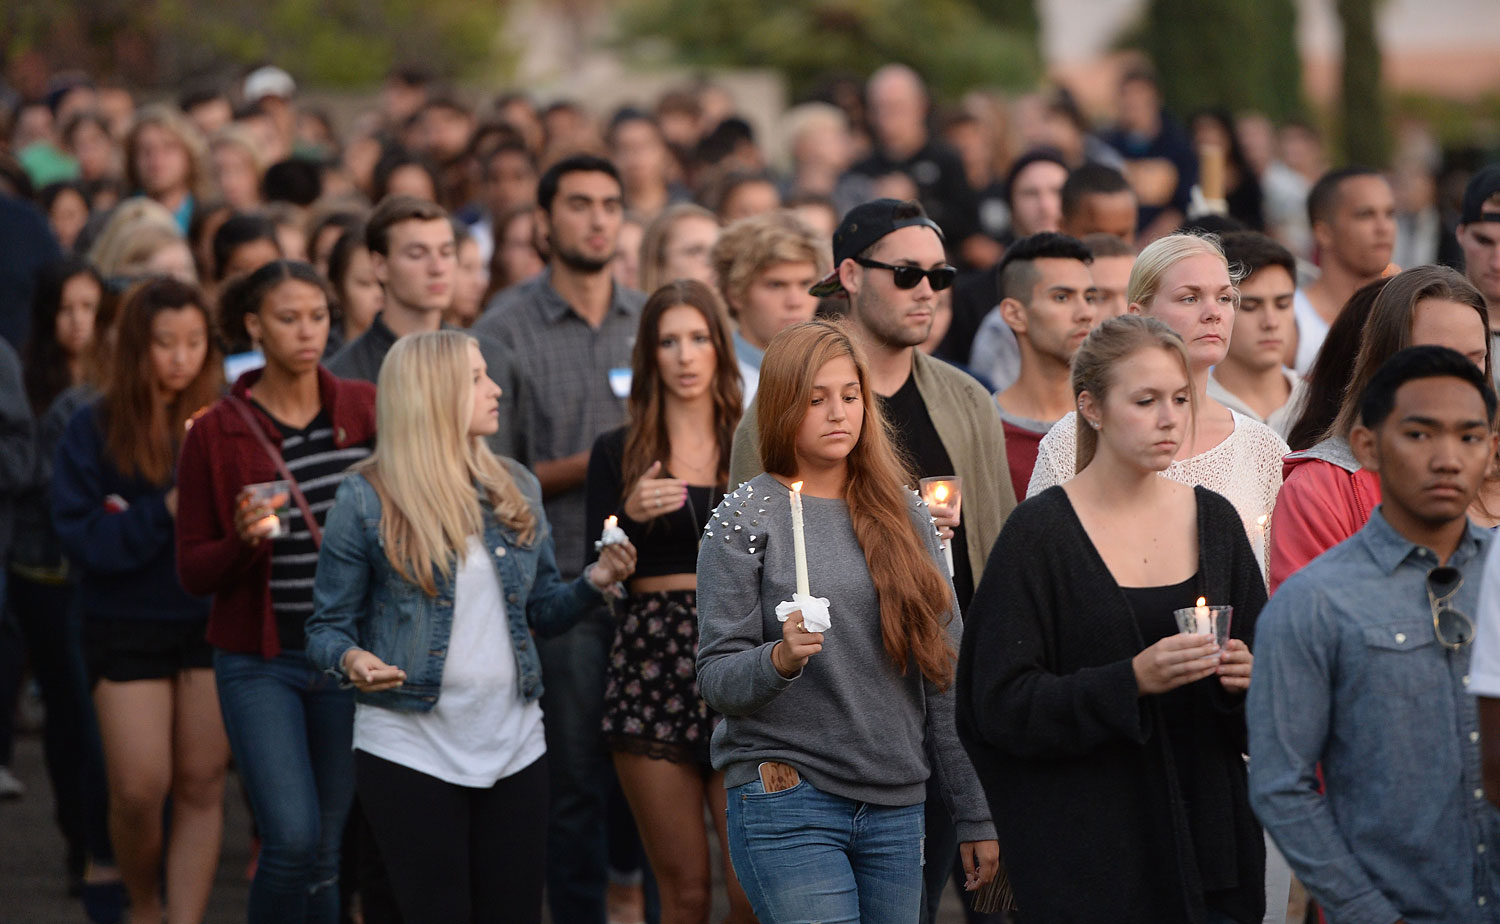 Students gathered for a candlelight vigil on the University of California Santa Barbara campus May 24, 2014 to remember those killed Friday night during a rampage in nearby Isla Vista. (Robyn Beck—AFP/Getty Images)